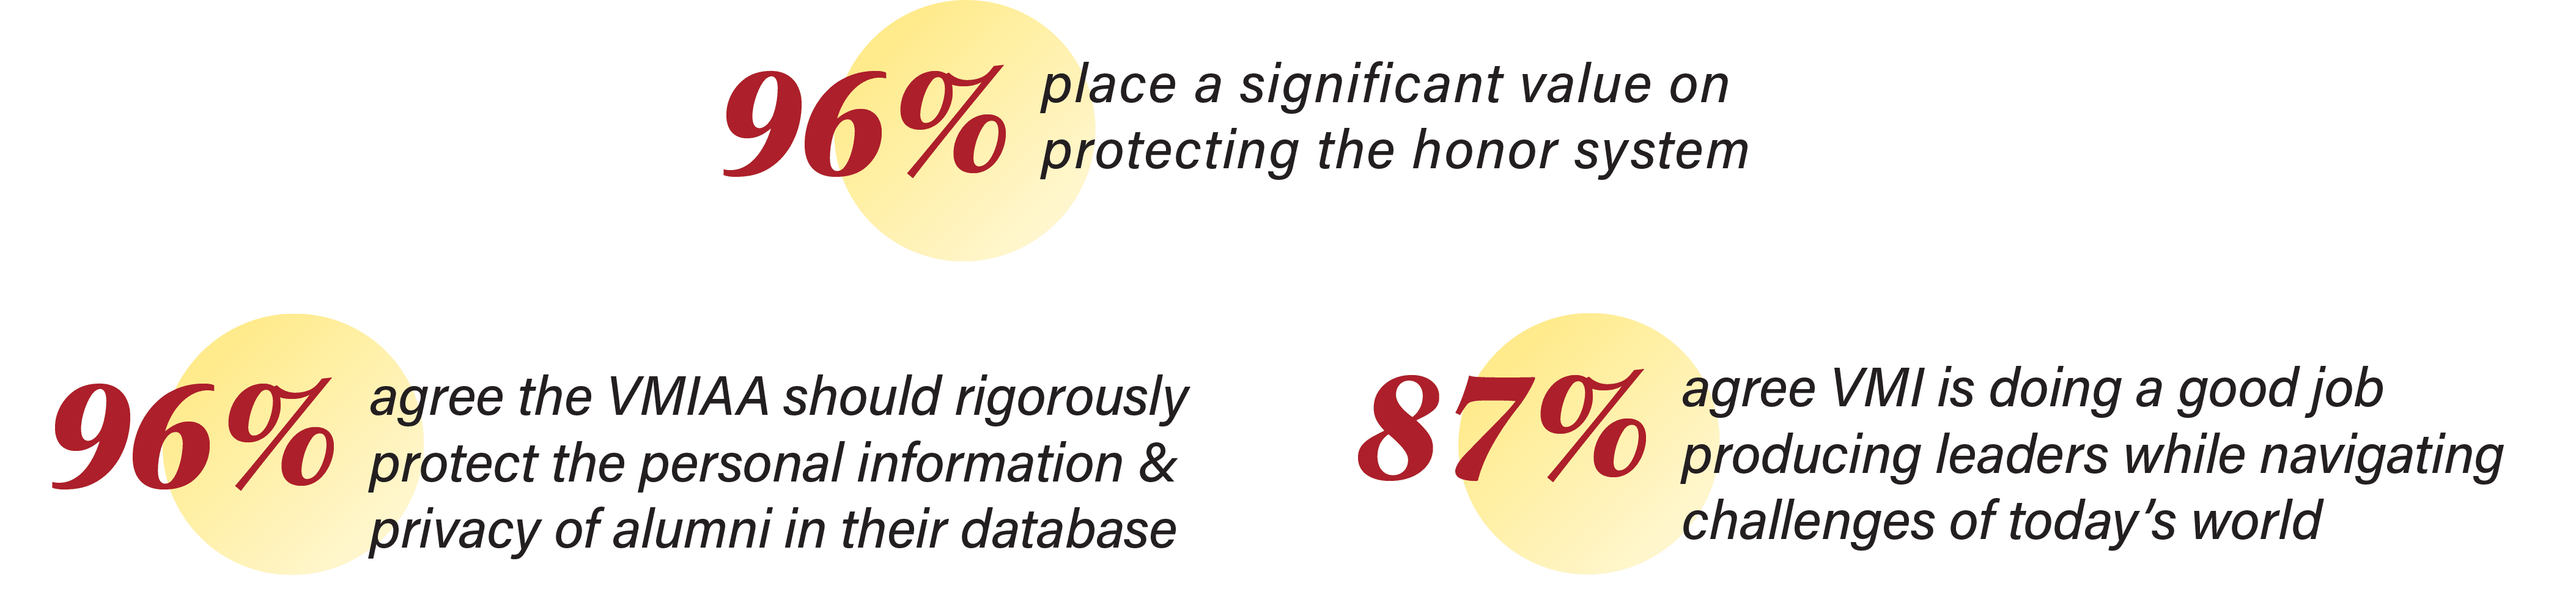 styled numbers saying 96% place a significant value on protecting the honor system, 96% agree the VMIAA should rigorously protect the personal information and privacy of alumni in their database, and 87% agree VMI is doing a good job producing leaders while navigating challenges of today's world.